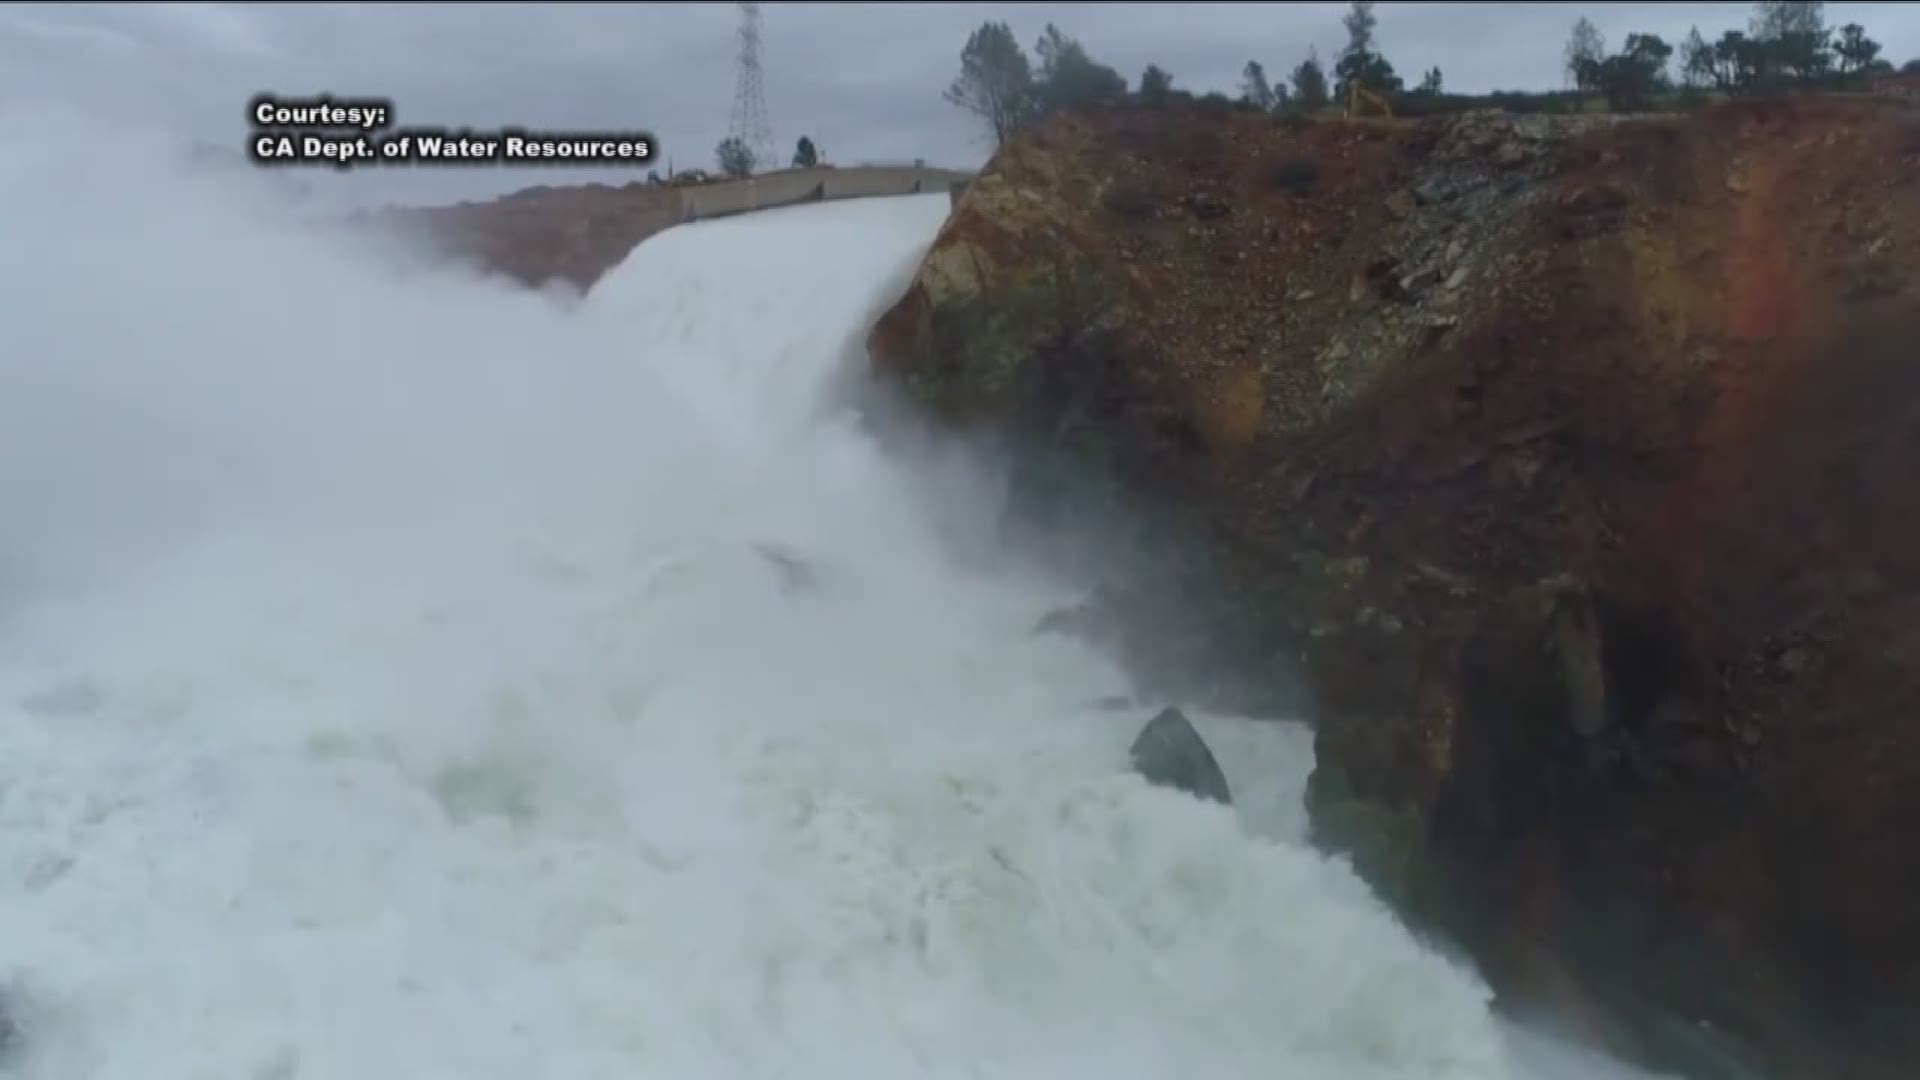 Work continues at damaged Oroville spillway. (May 17, 2017)